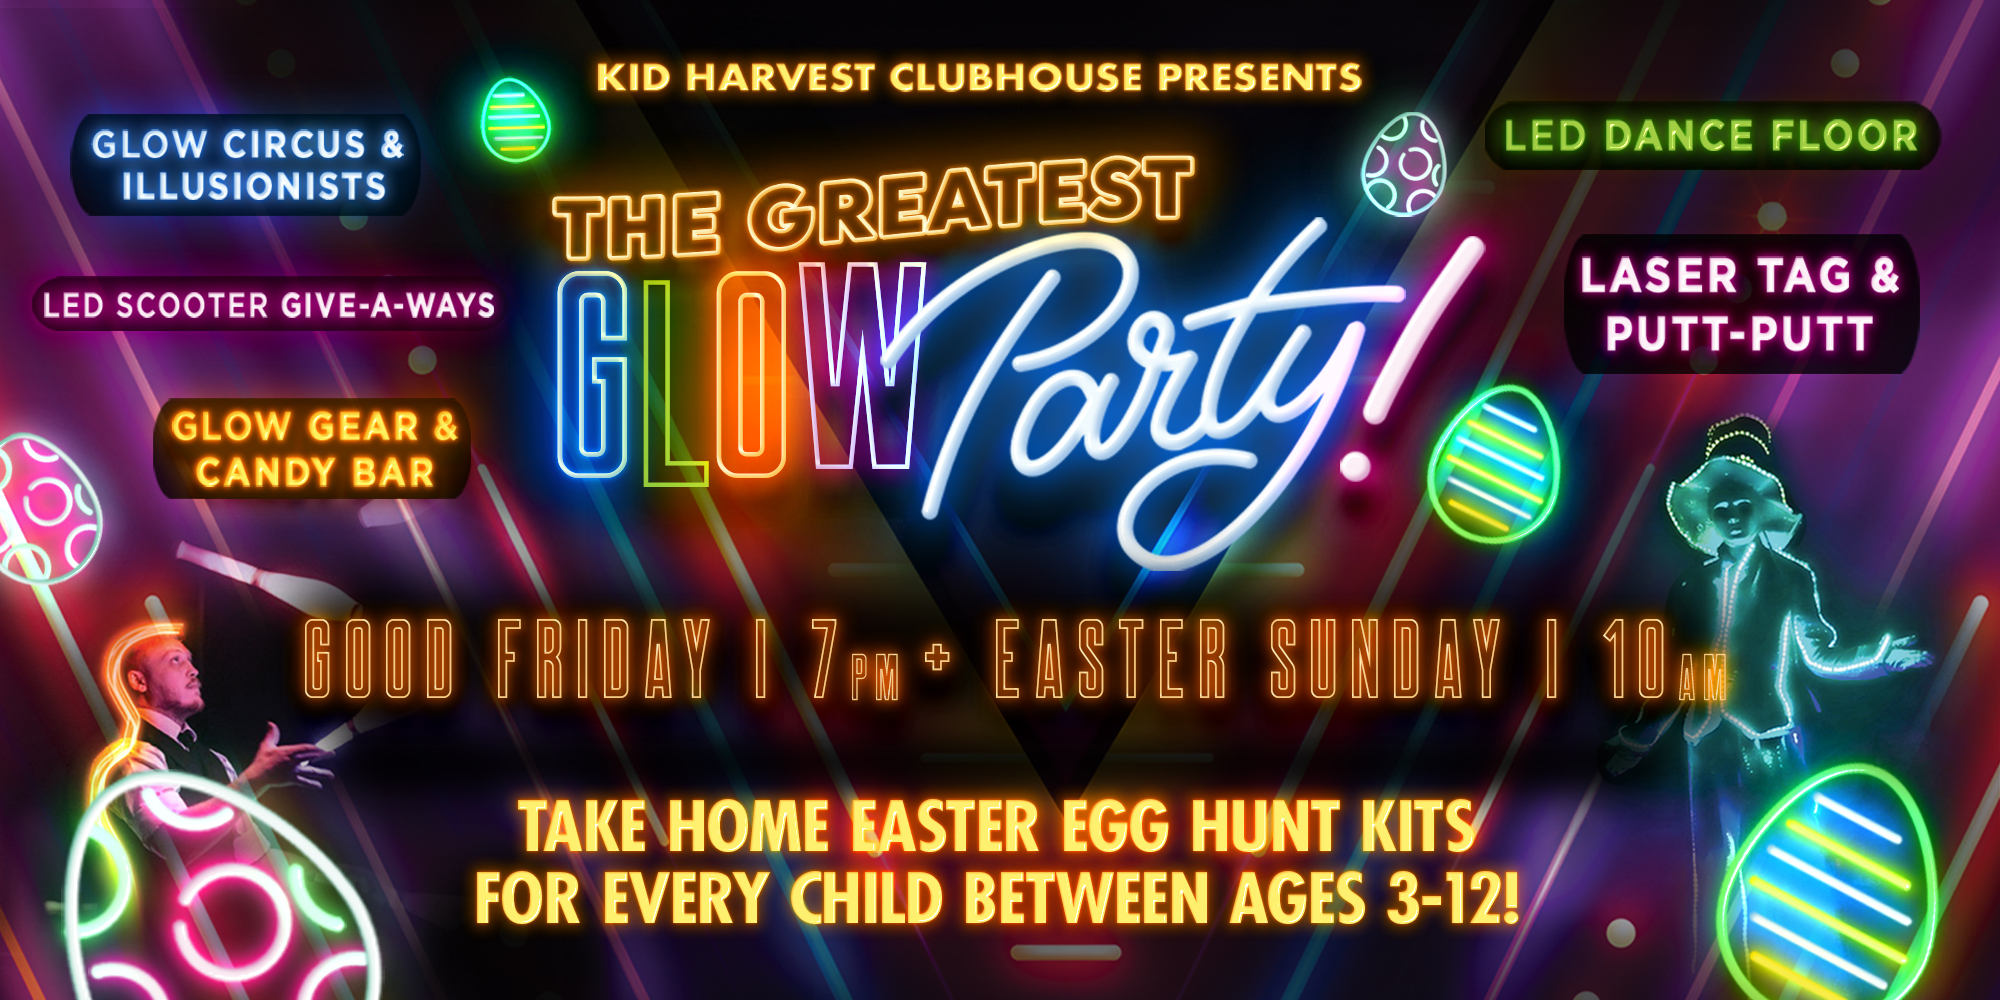 Kid Harvest Clubhouse Presents the Greatest Glowparty! Good Friday 7pm + Easter Sunday 10am  Glow Circus & Illusionists, Games, Give-a-ways, Laster Tage & Putt-puttand Take Home Easter Egg Hunt Kits for Every Child Between Ages 3-12! Led Scooter Give-a-ways Cany Bar Glow Gear